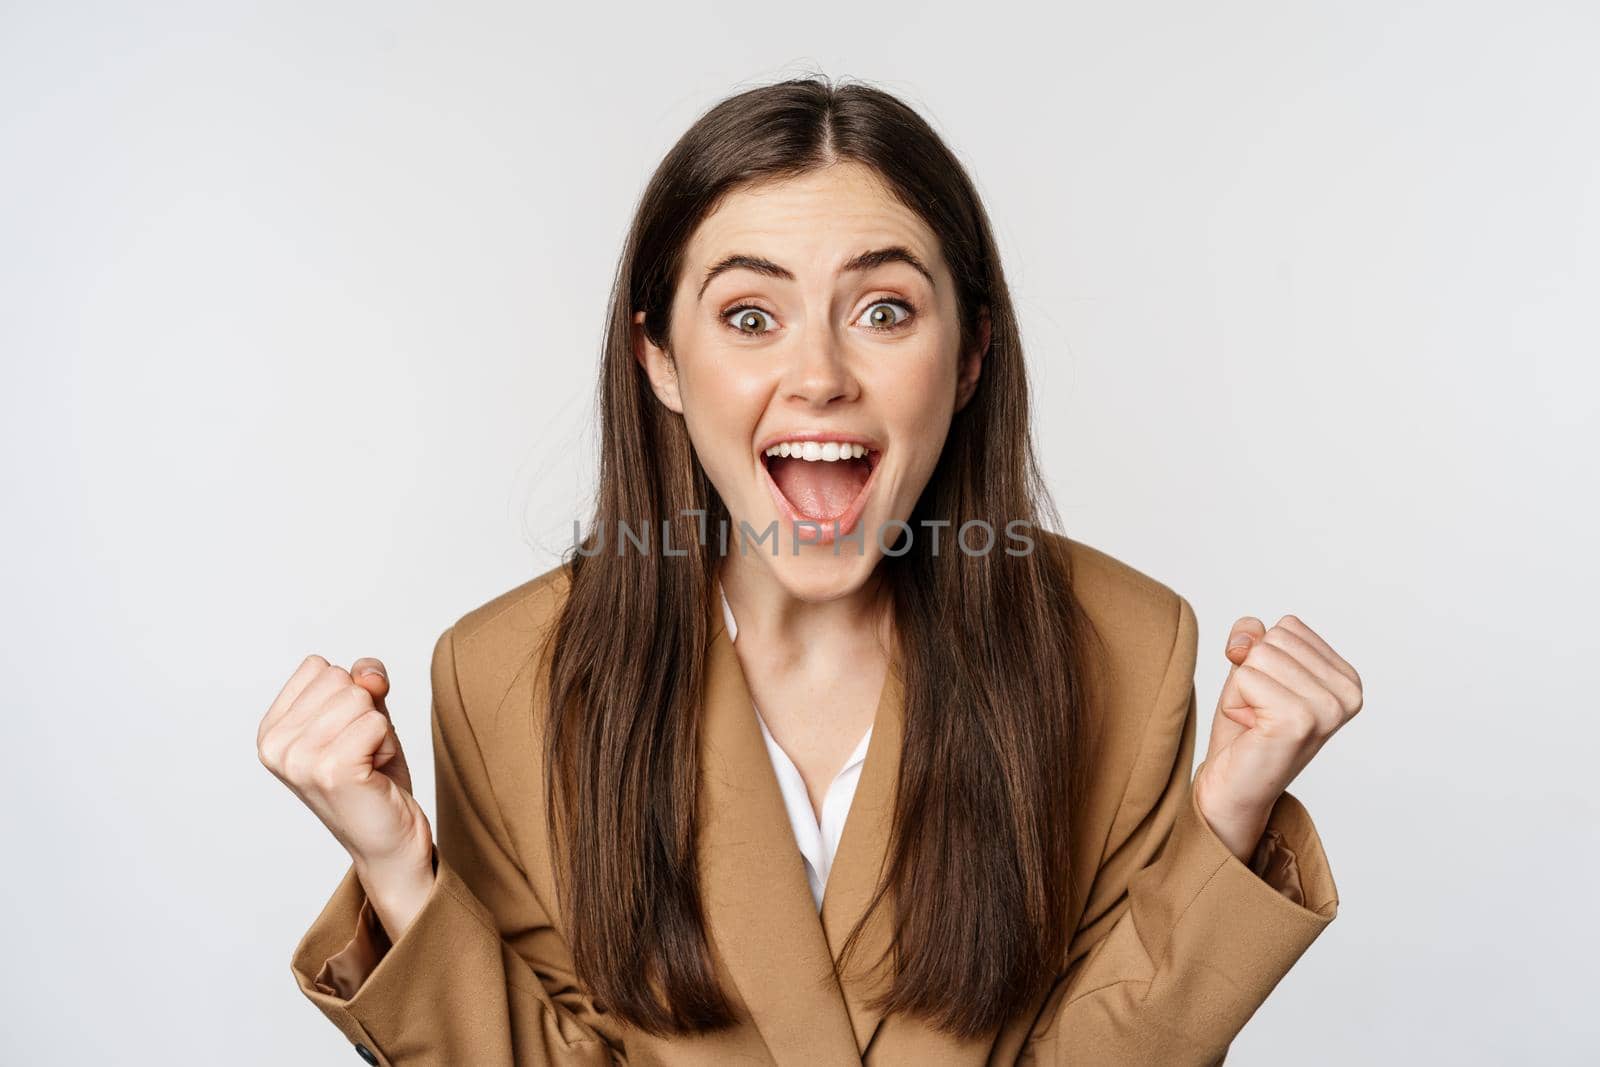 Enthusiastic girl screaming and rejoicing, looking at camera, winning, celebrating victory and triumphing, standing over white background.